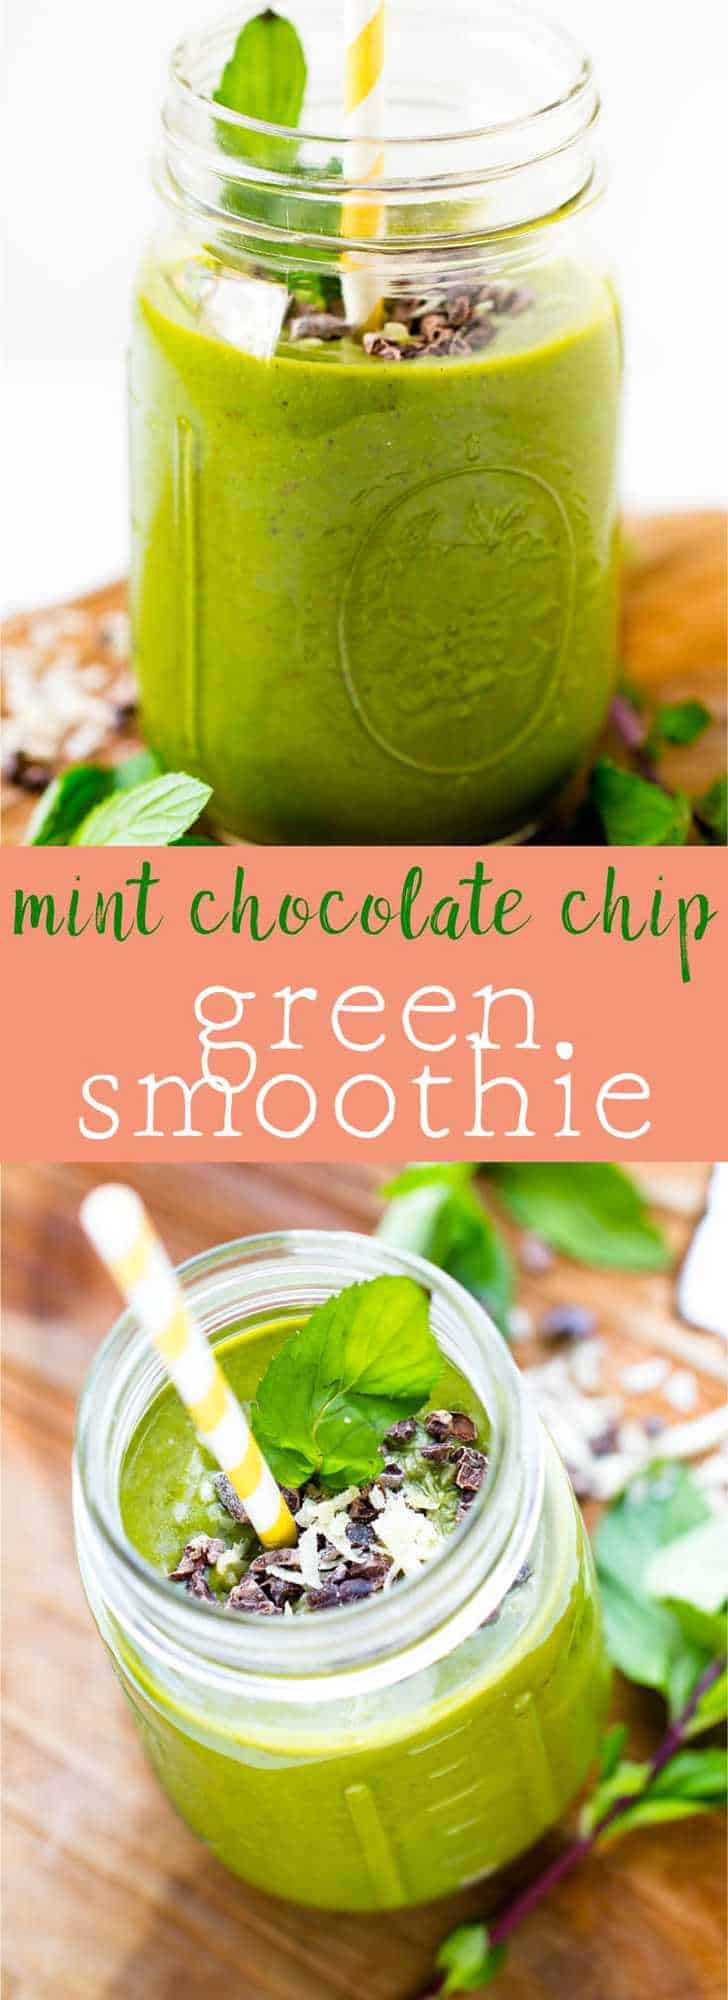 This Mint Chocolate Chip Green Smoothie is like dessert for breakfast with no guilt! It's quick, filling, and so tasty! via https://jessicainthekitchen.com